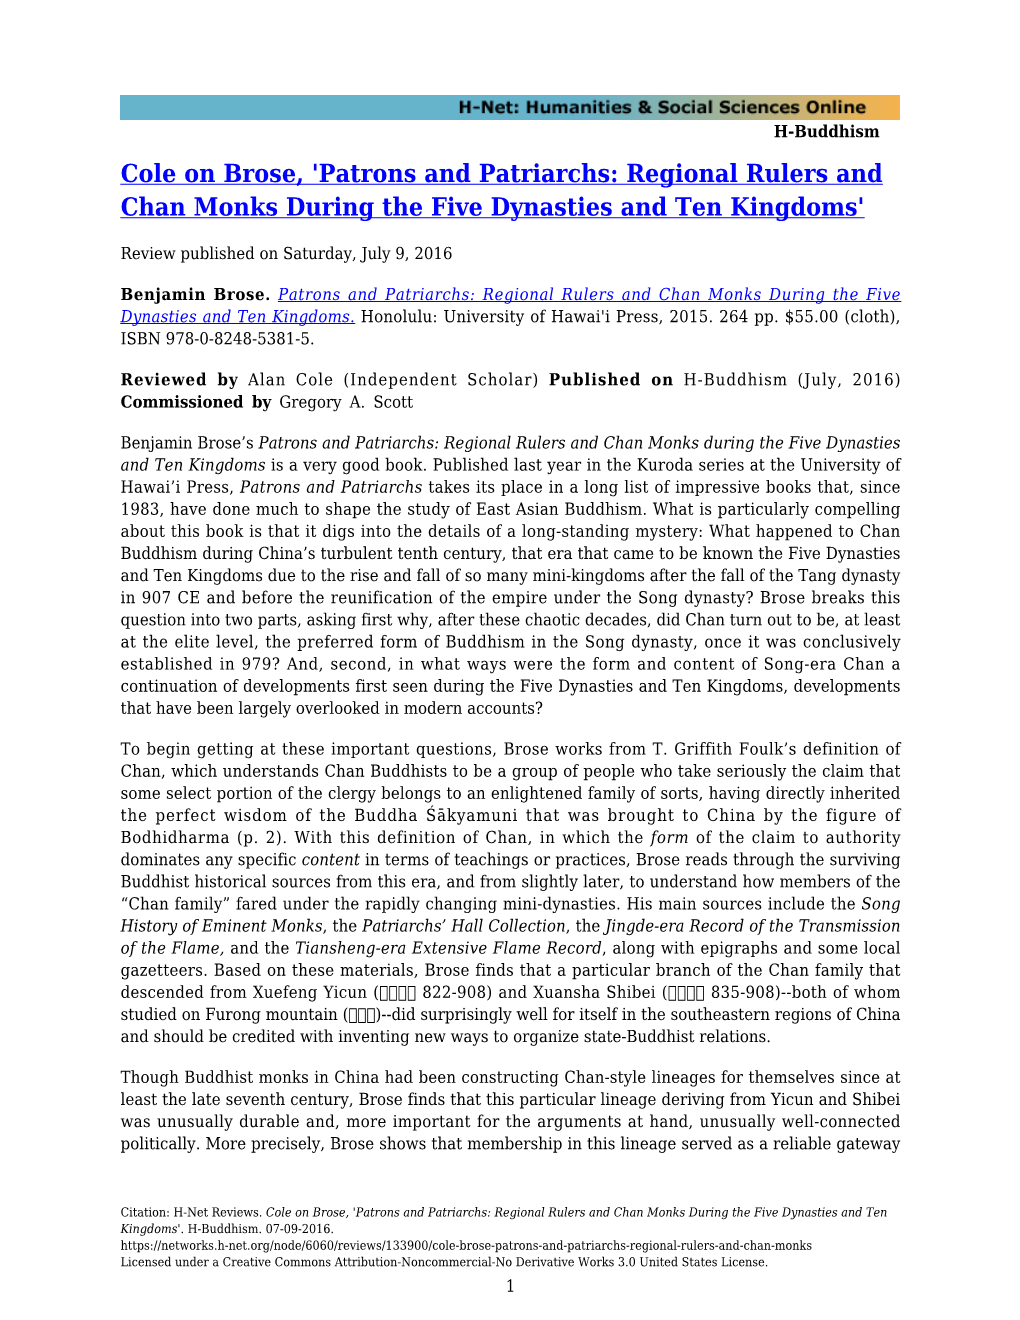 Patrons and Patriarchs: Regional Rulers and Chan Monks During the Five Dynasties and Ten Kingdoms'